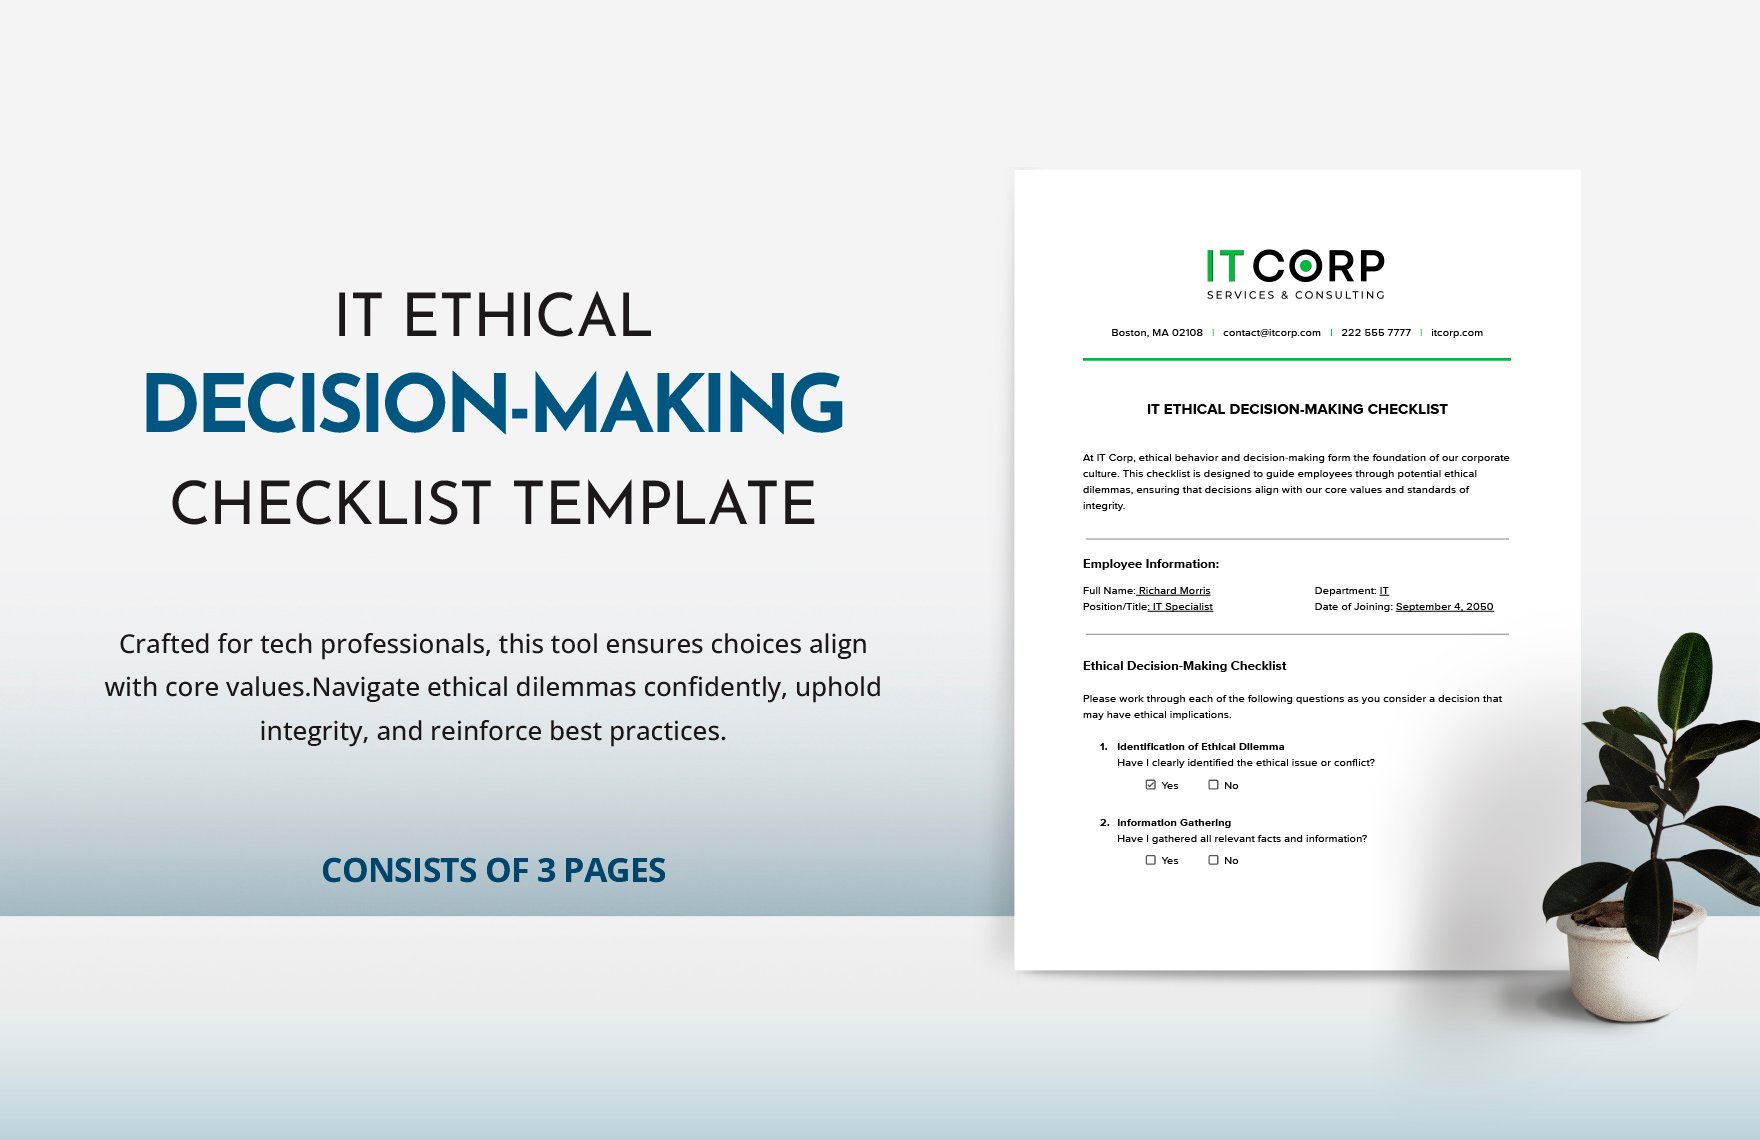 IT Ethical Decision-Making Checklist Template